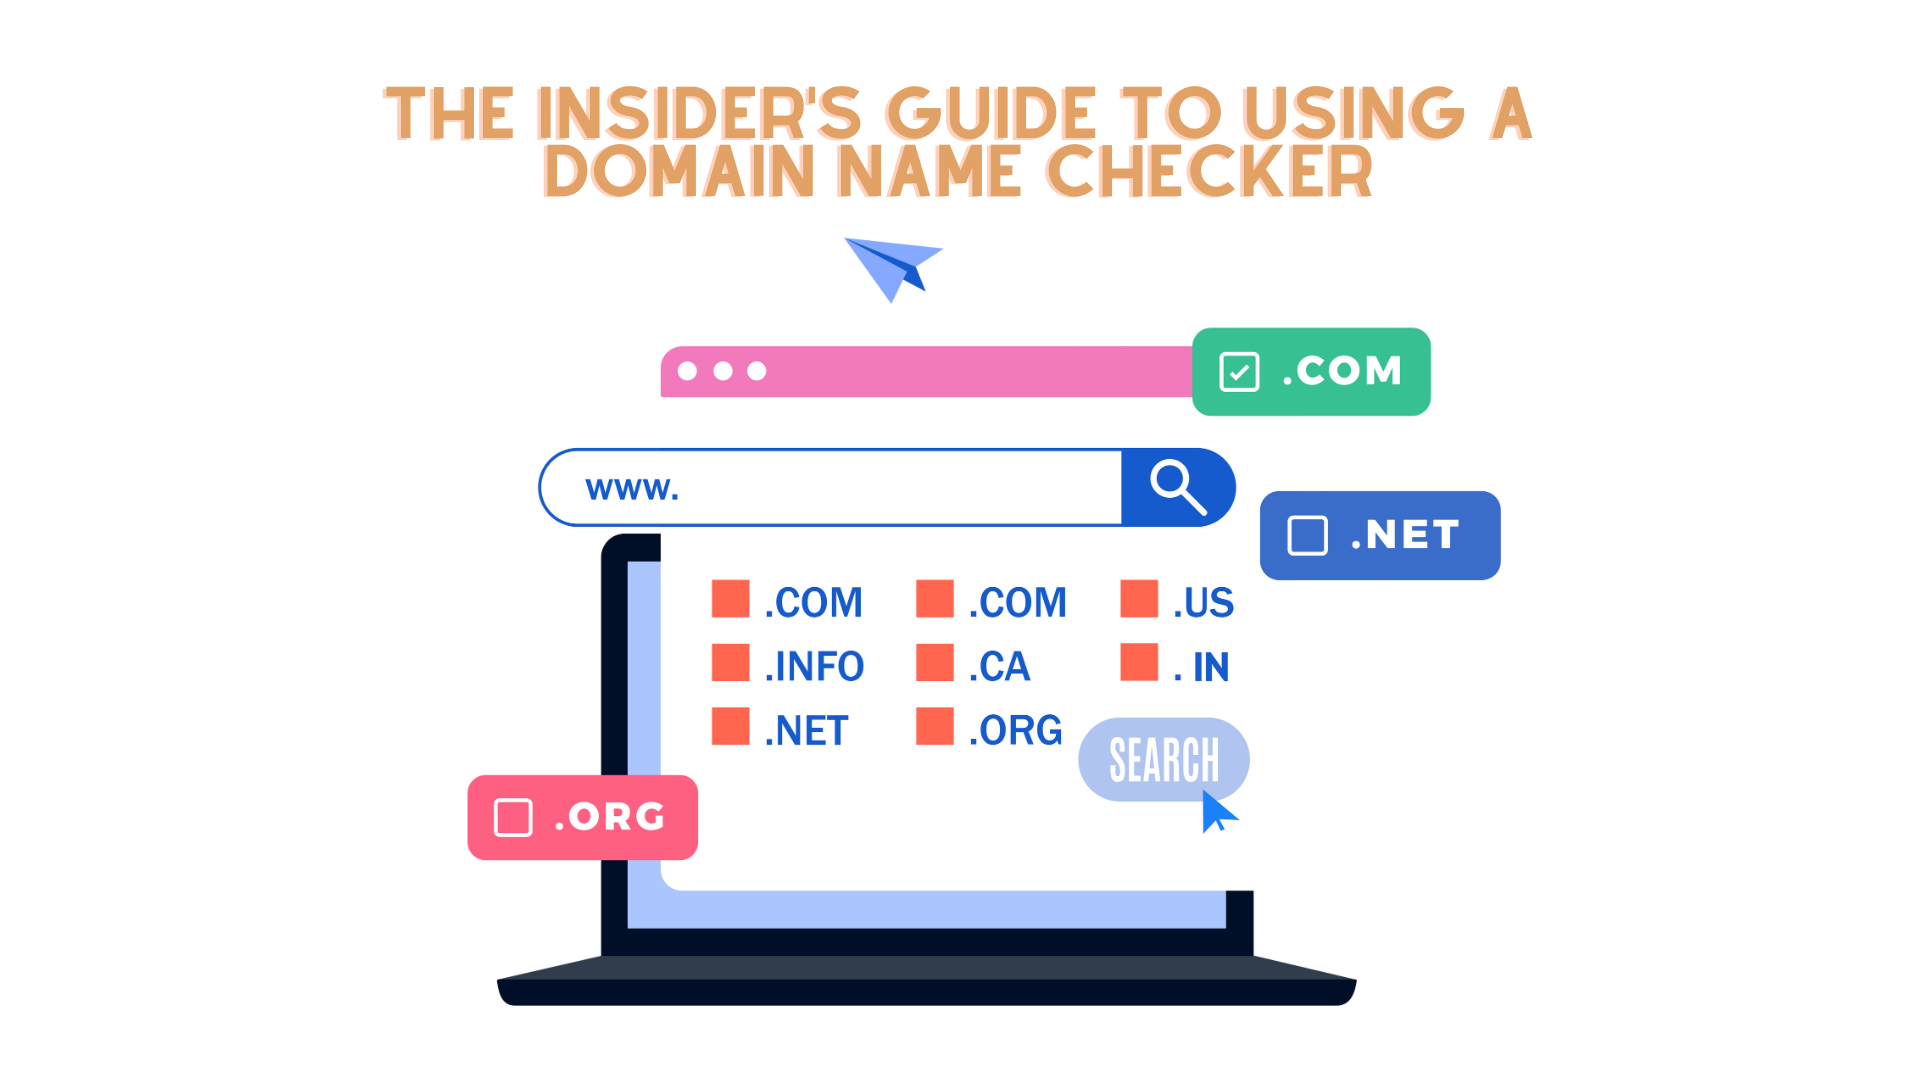 The Insider's Guide to Using a Domain Name Checker: All You Need to Know